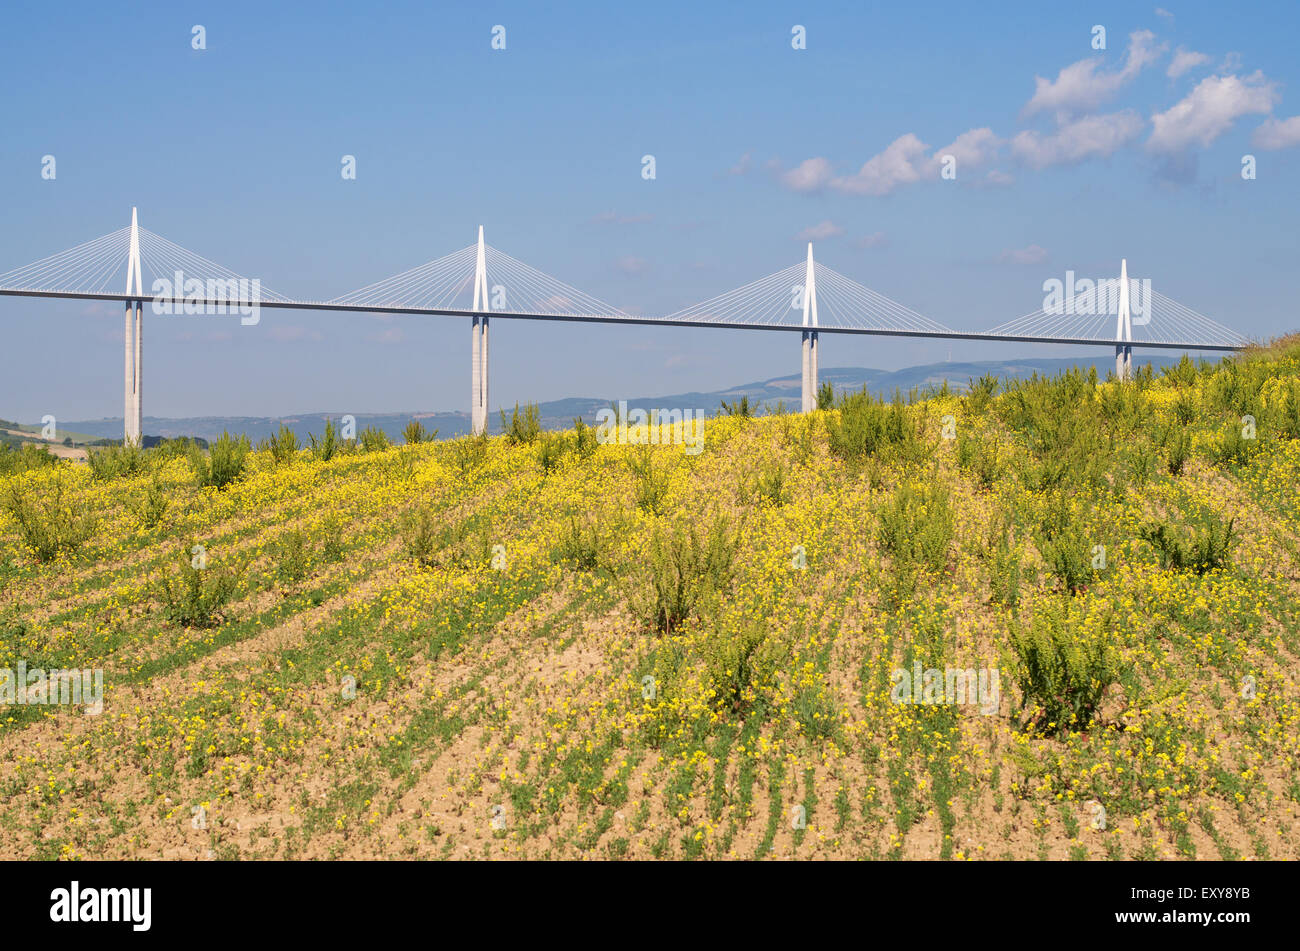 The Millau viaduct with yellow wild flowers in the foreground, Averyon,  Midi-Pyrenees, France, Europe Stock Photo